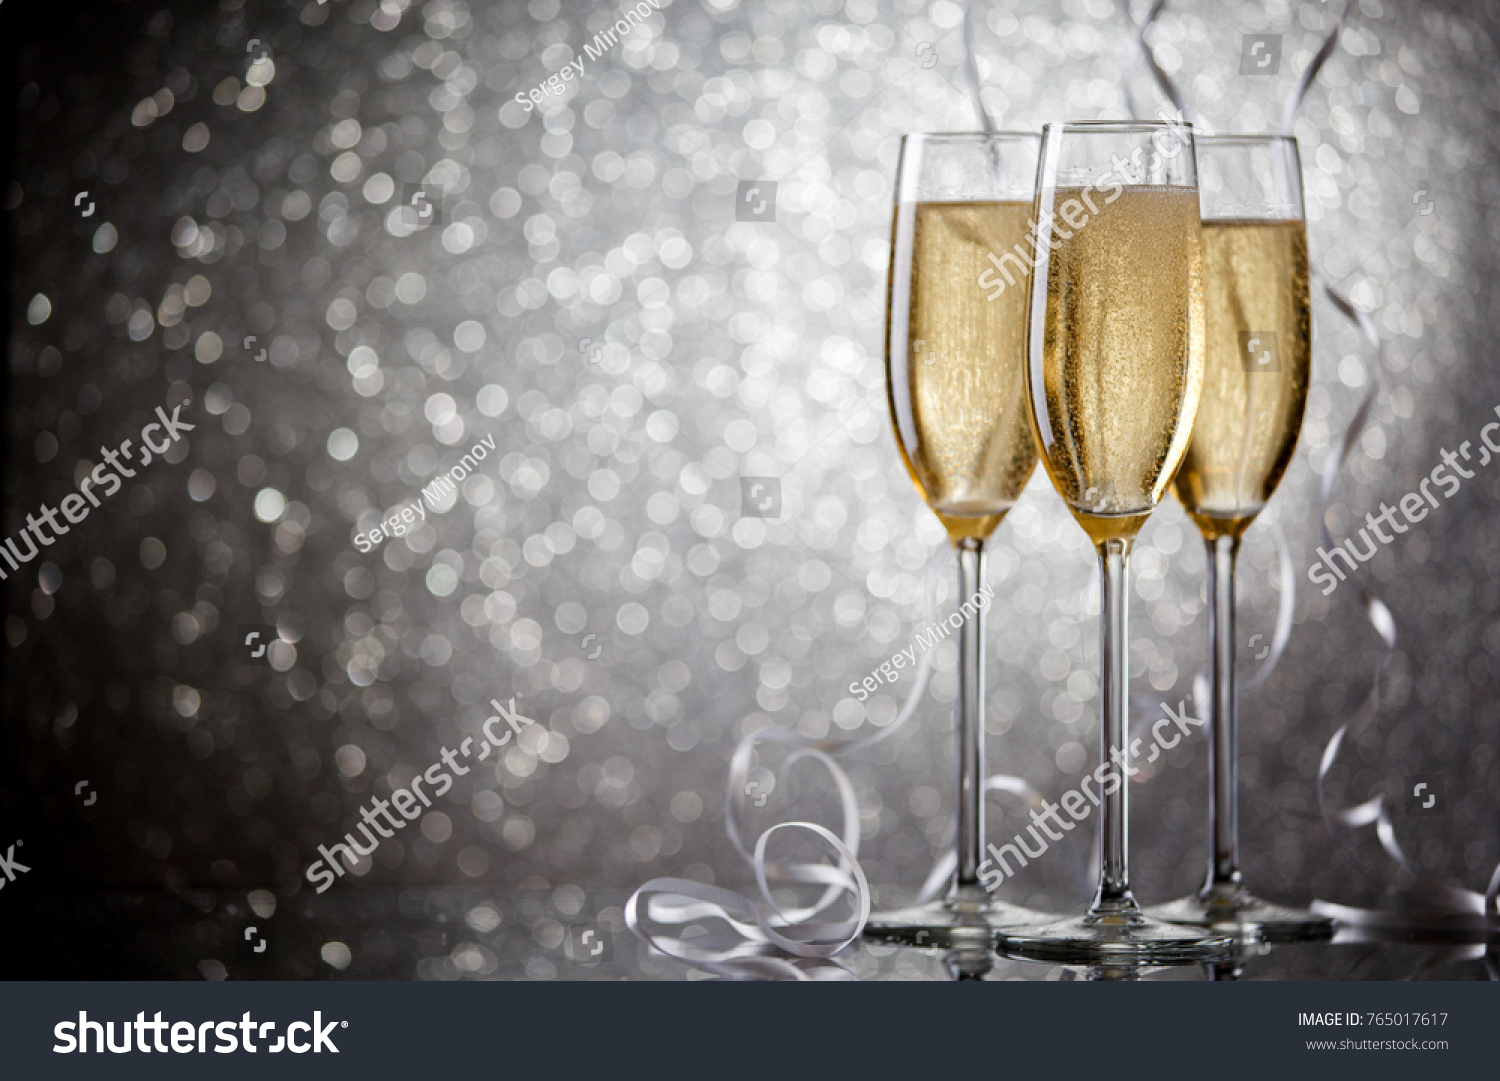 Image of three glasses with wine on gray background #765017617